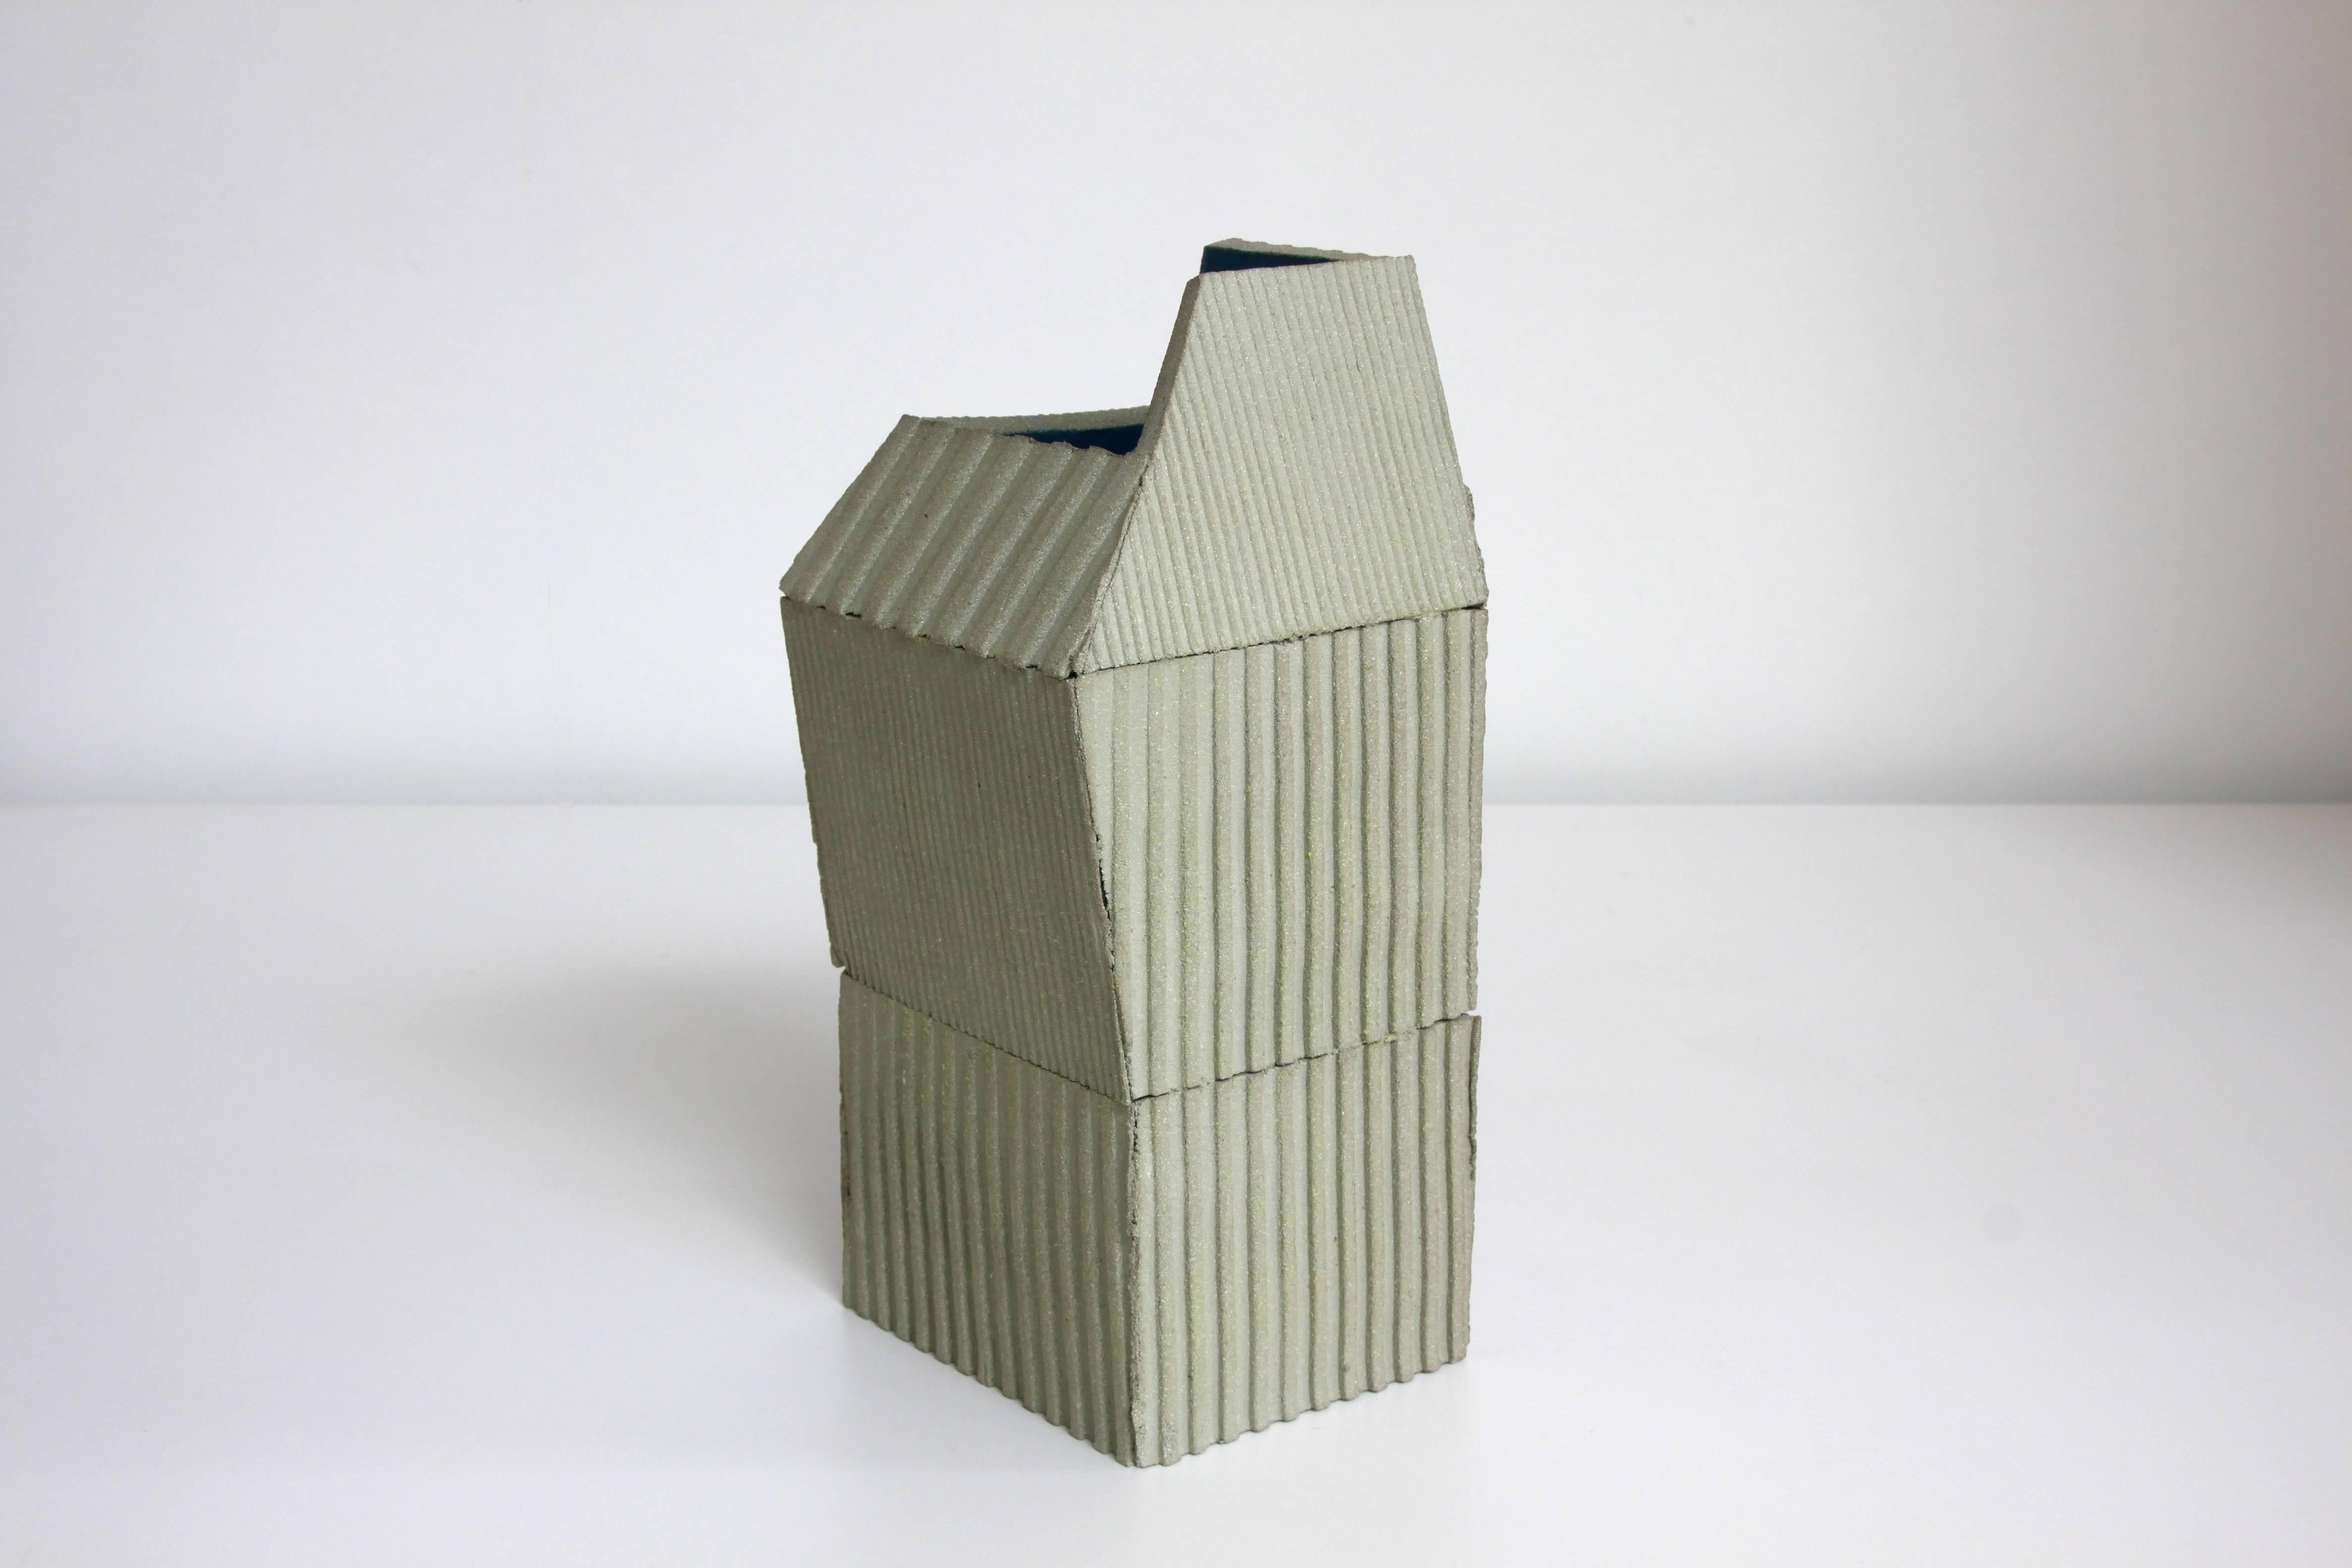 “Uralito” are vases created by Formabesta and assembled by hand inspired by the constructive solutions of the rural Galicia, impossible combinations
of corrugated metal, corrugated iron and soffits
patched to the roofs. Uralito is assembled by